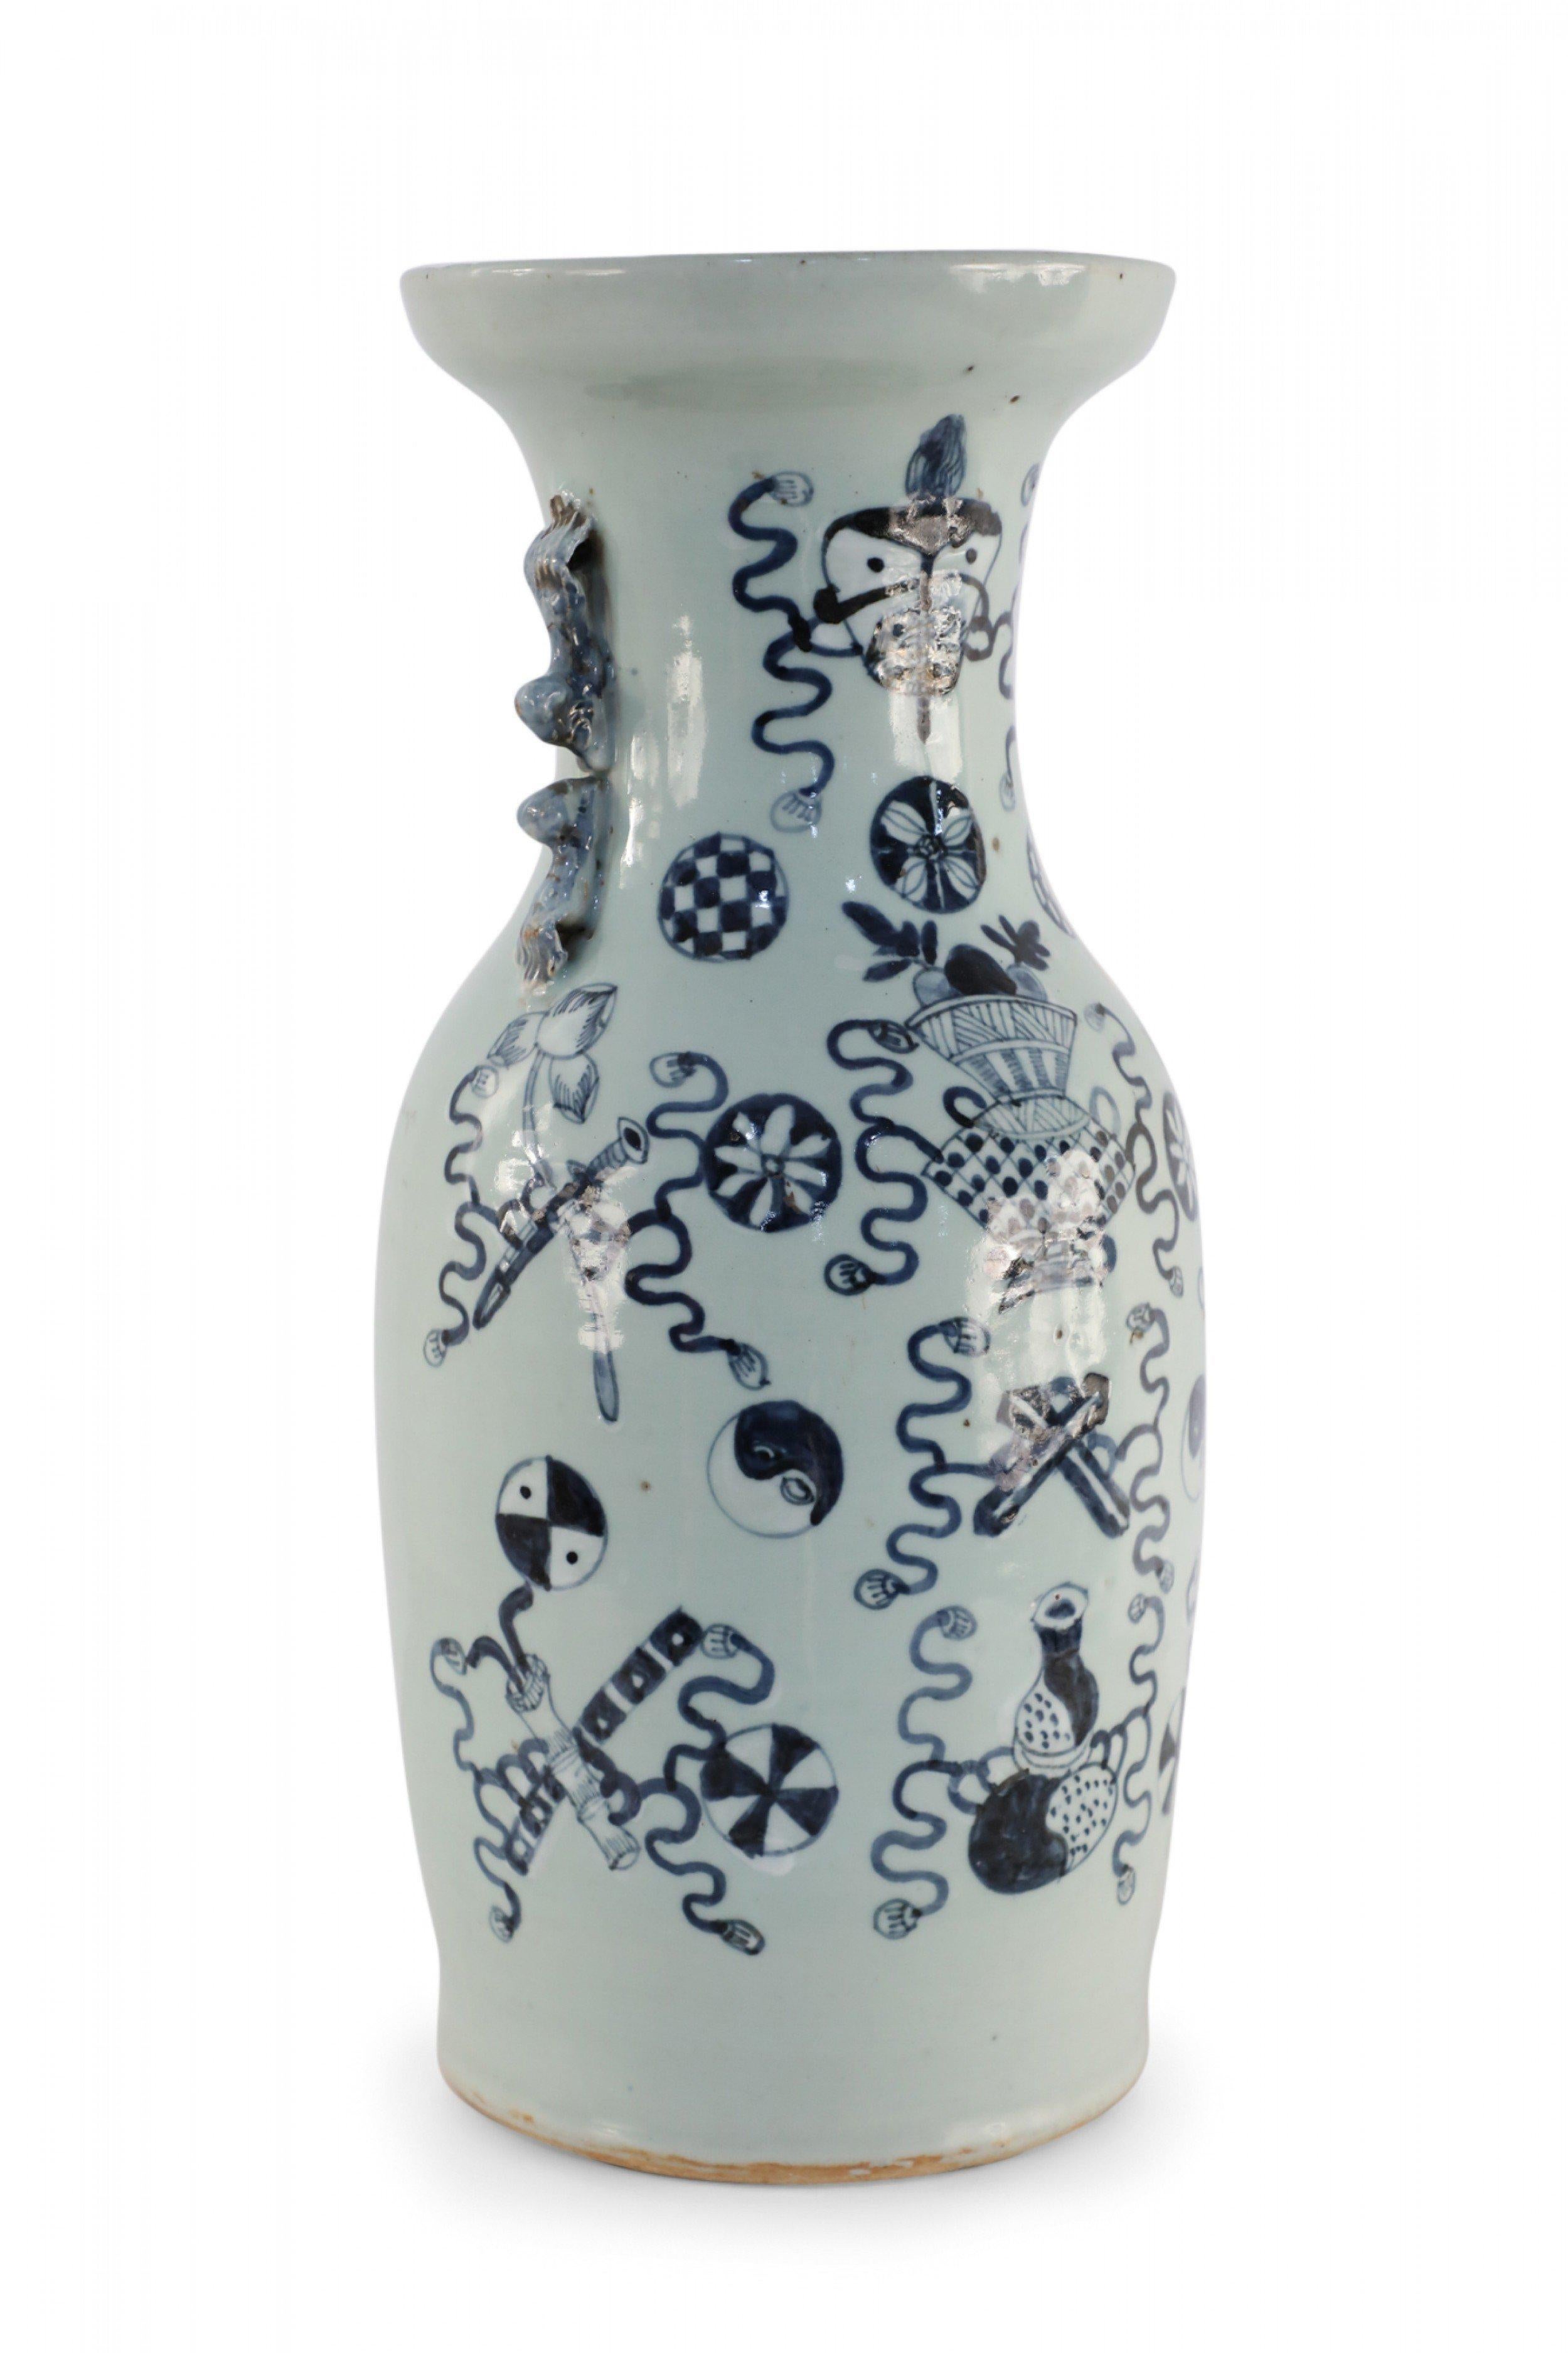 Antique Chinese (late 19th century) large, off-white porcelain urn painted with a navy blue pattern featuring Buddhist symbols and other shapes with accented blue scrolled handles.
    